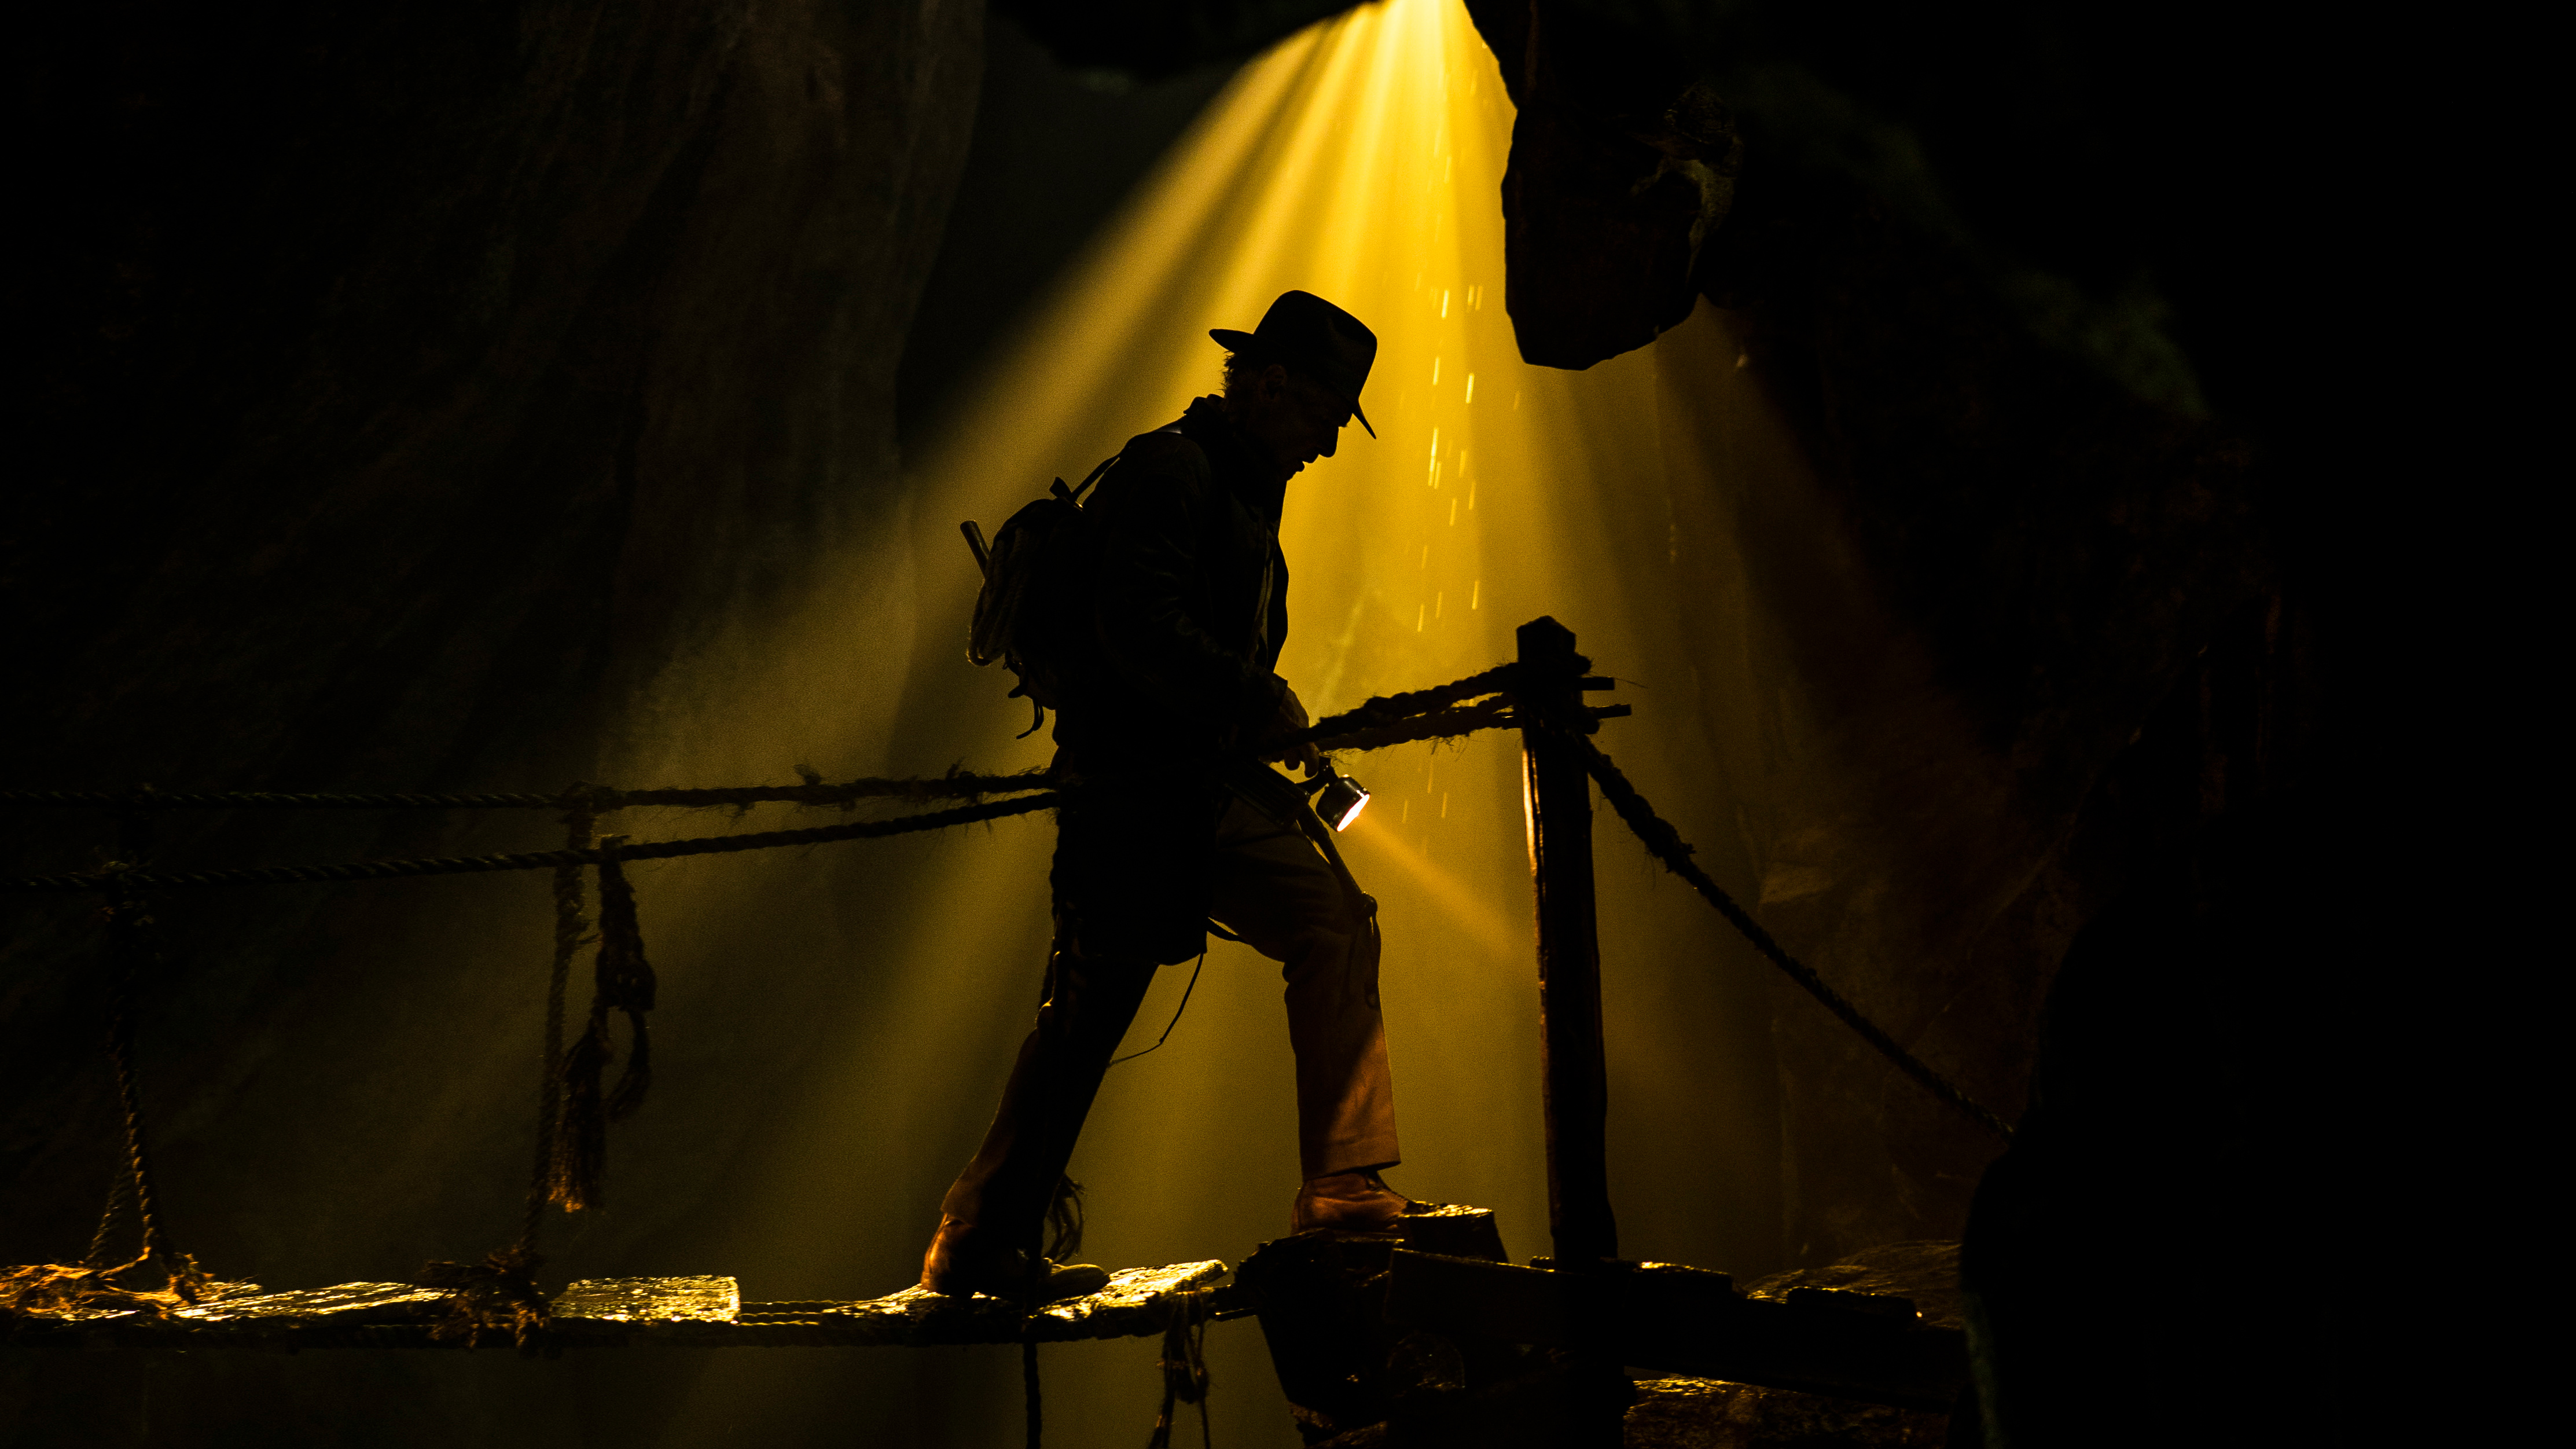 Movie Indiana Jones and the Dial of Destiny HD Wallpaper | Background Image